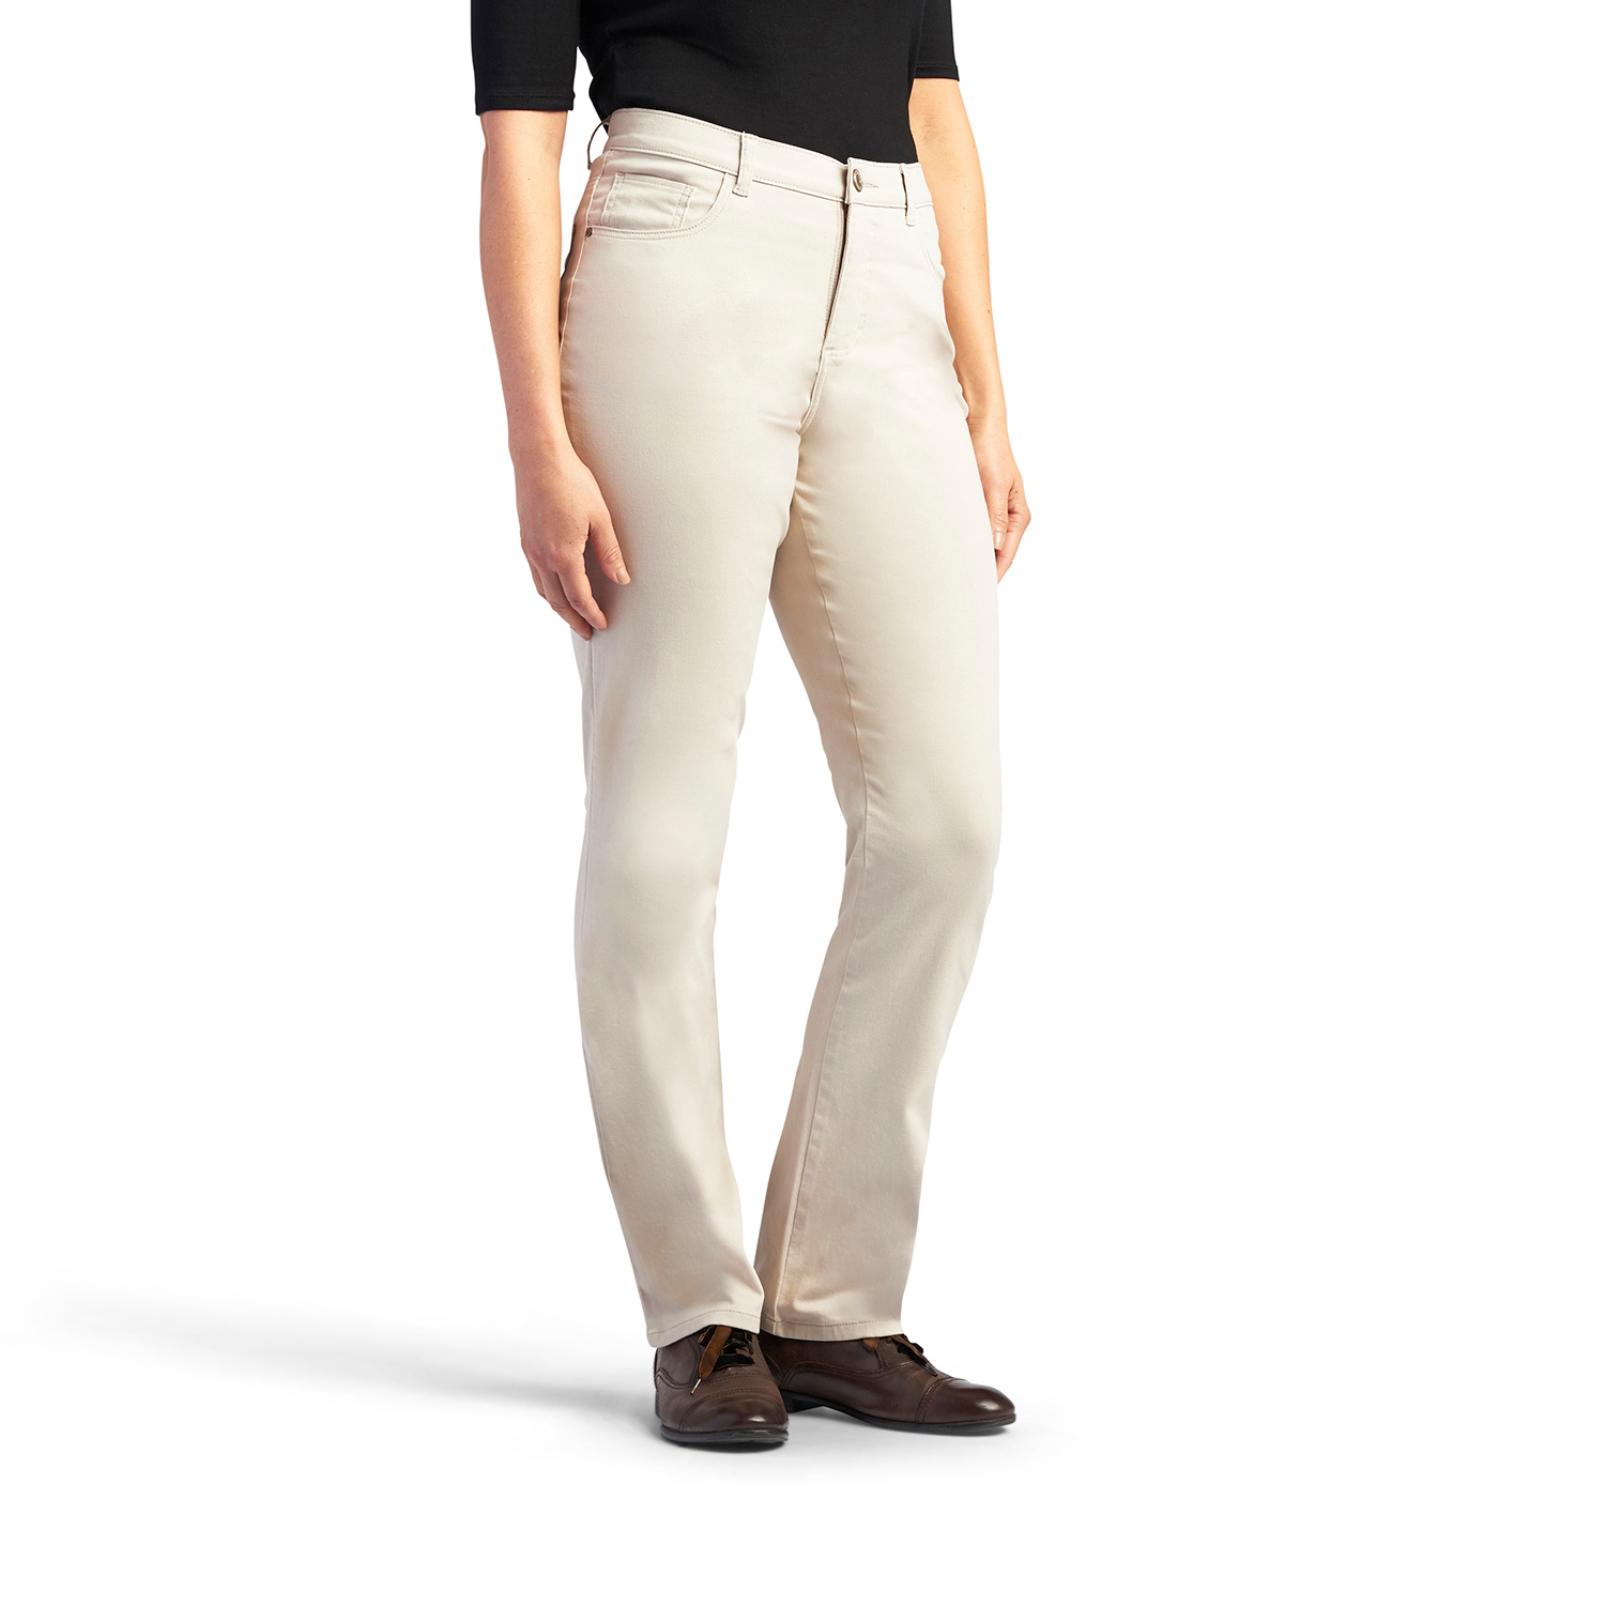 LEE Petites' Classic Fit Colored Jeans